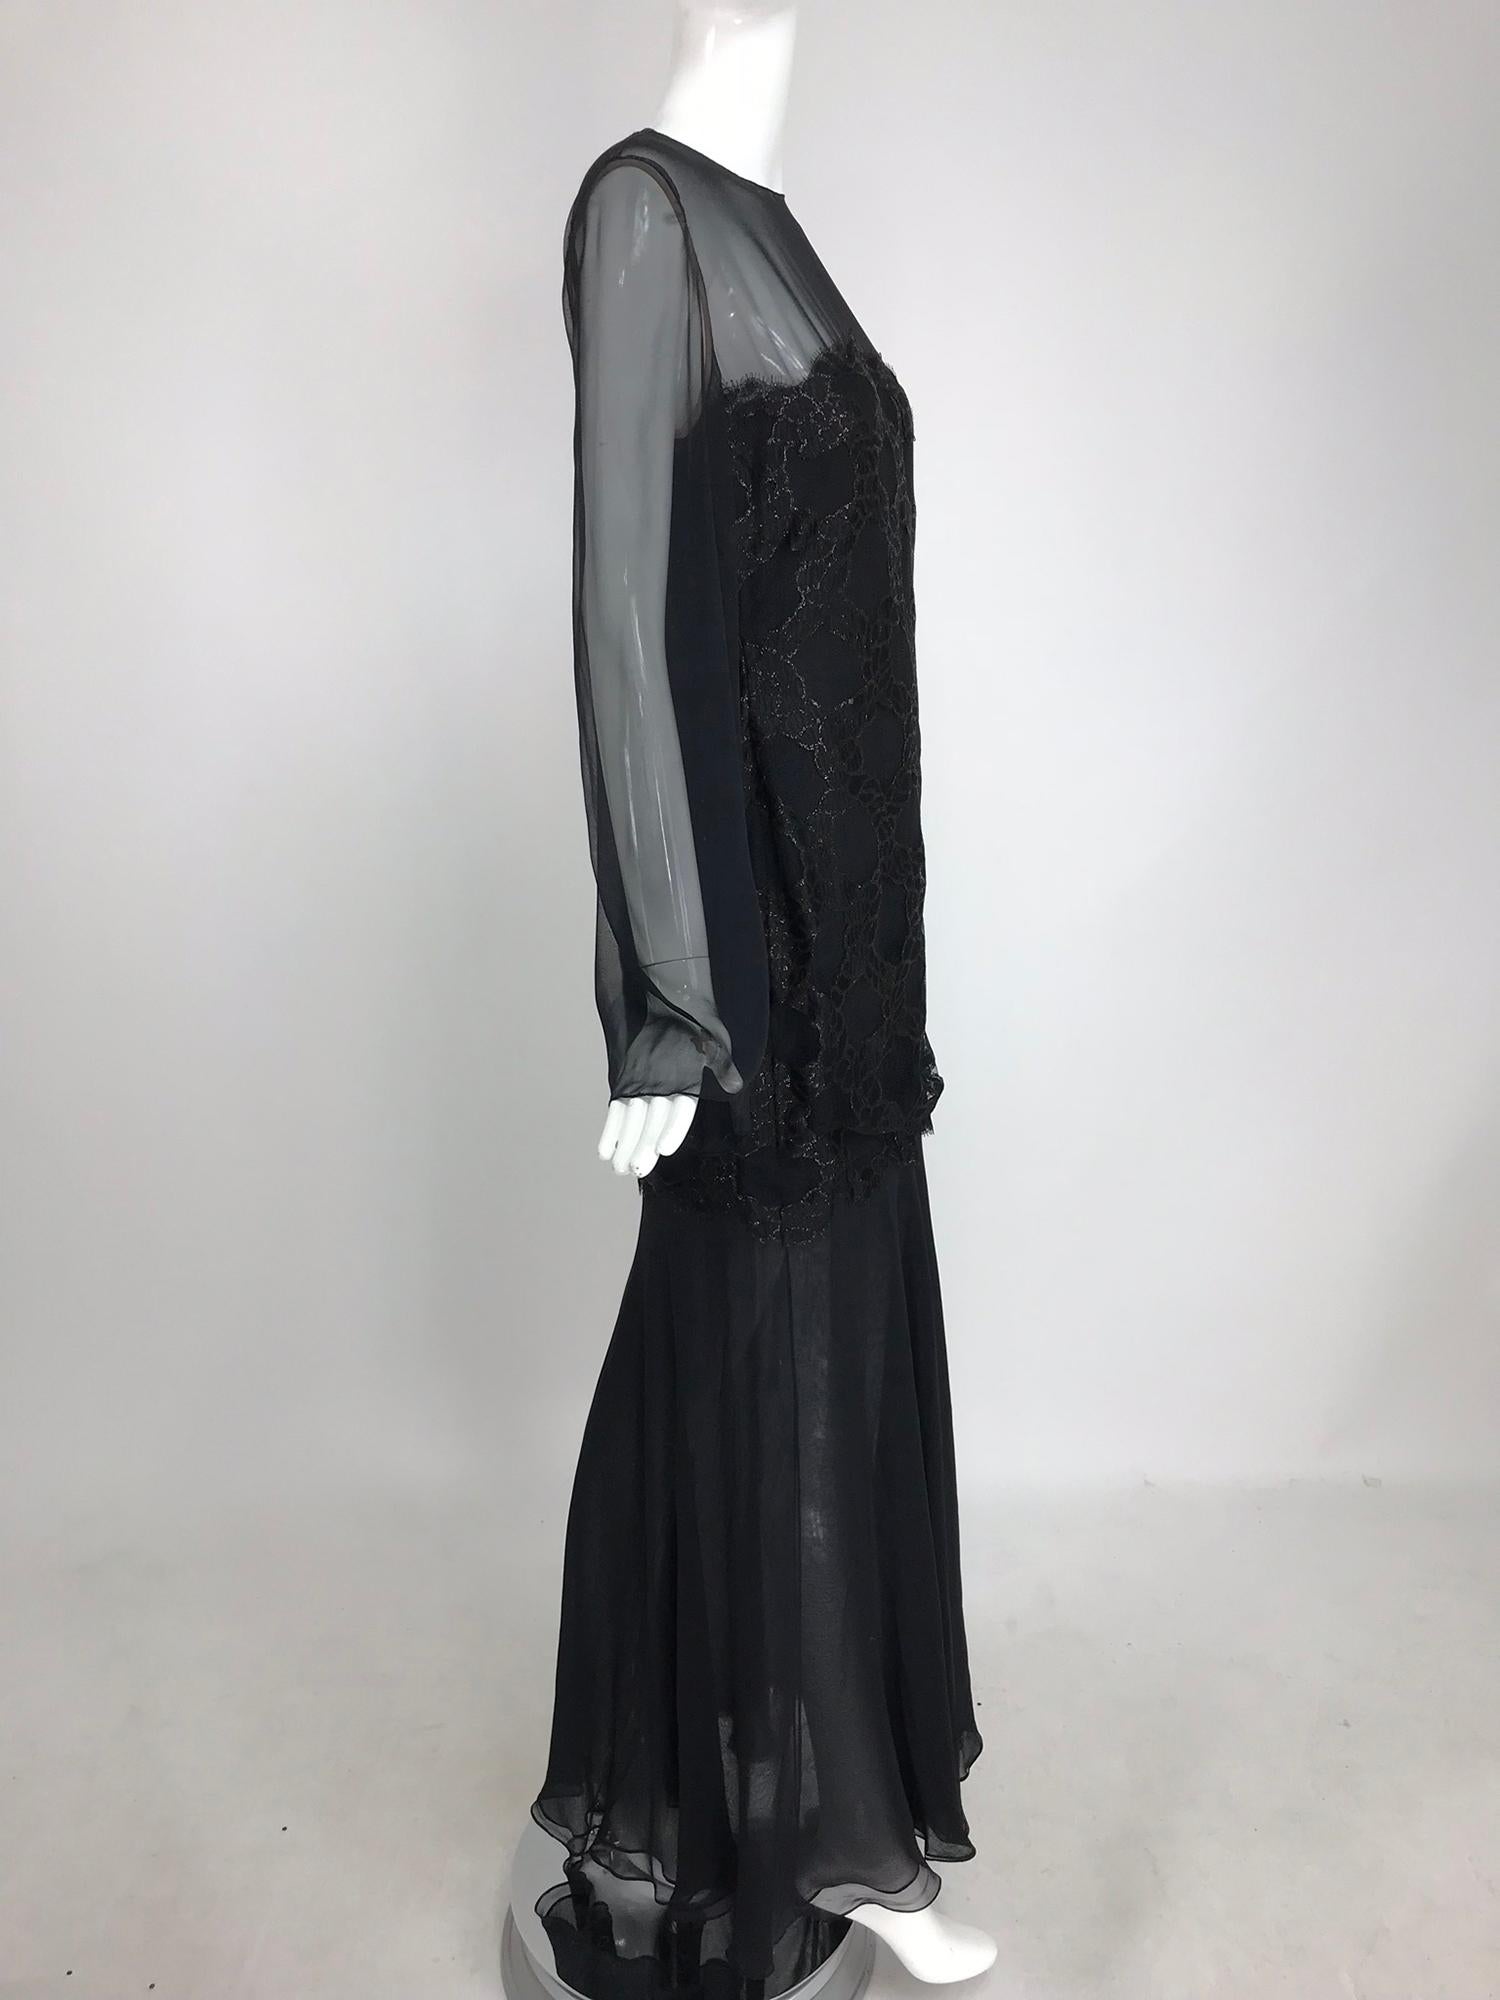 Bill Blass Lacquered Lace Over Black silk chiffon Evening Dress 1970s 12 In Excellent Condition For Sale In West Palm Beach, FL